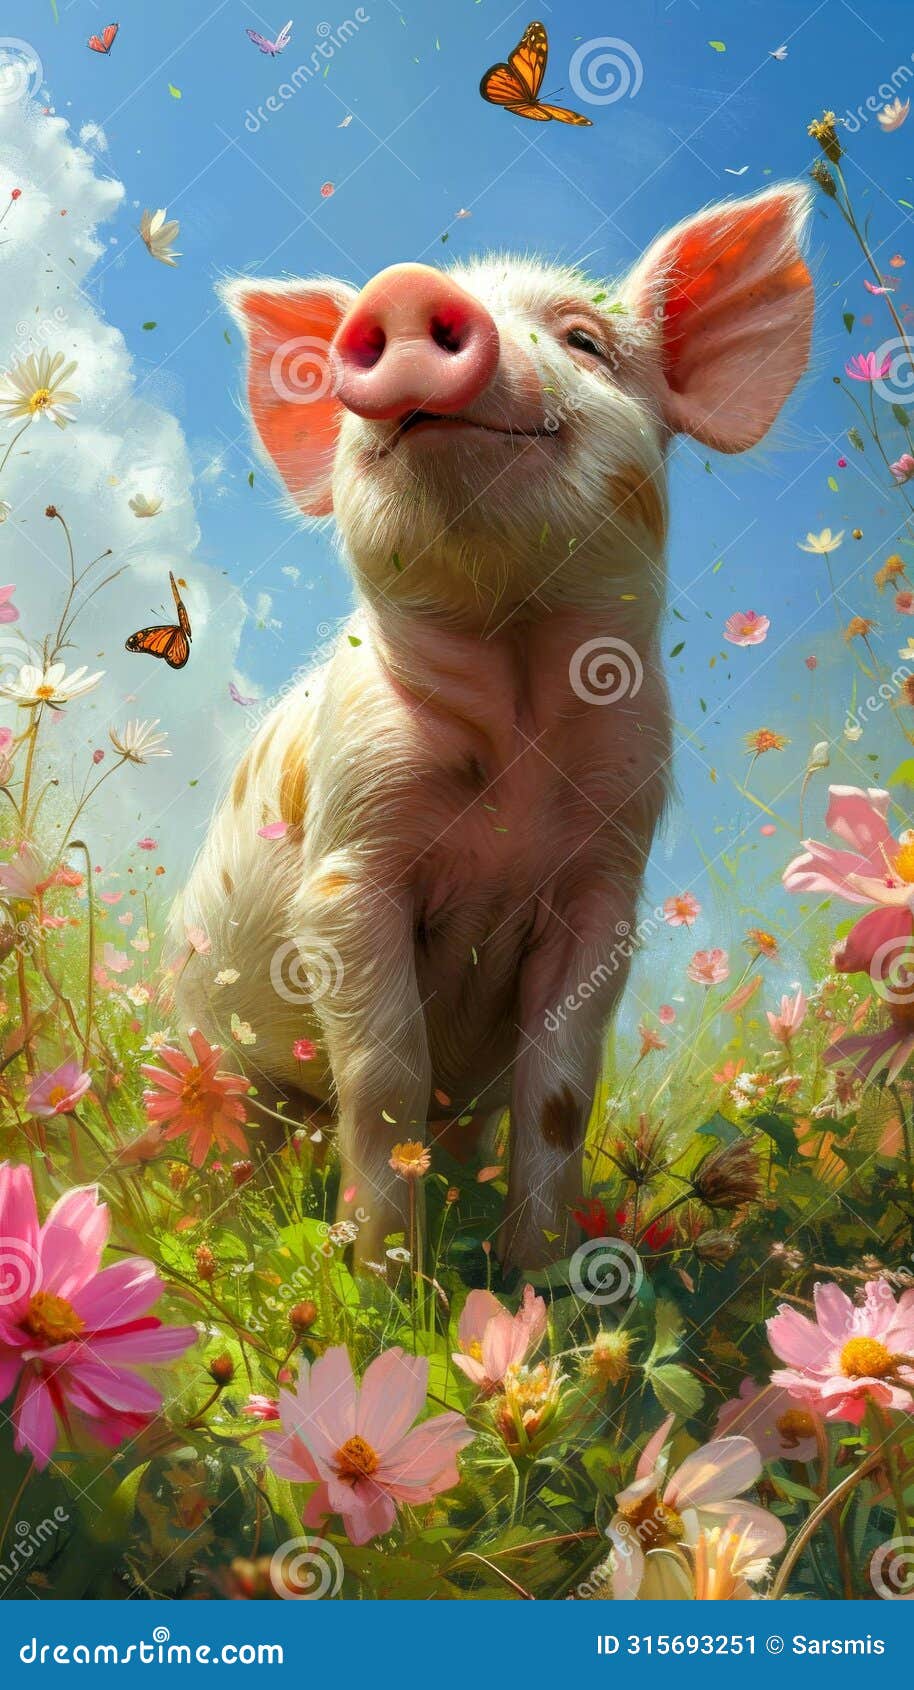 joyful piglet in a blossoming meadow. greeting card for celebrating national pig day